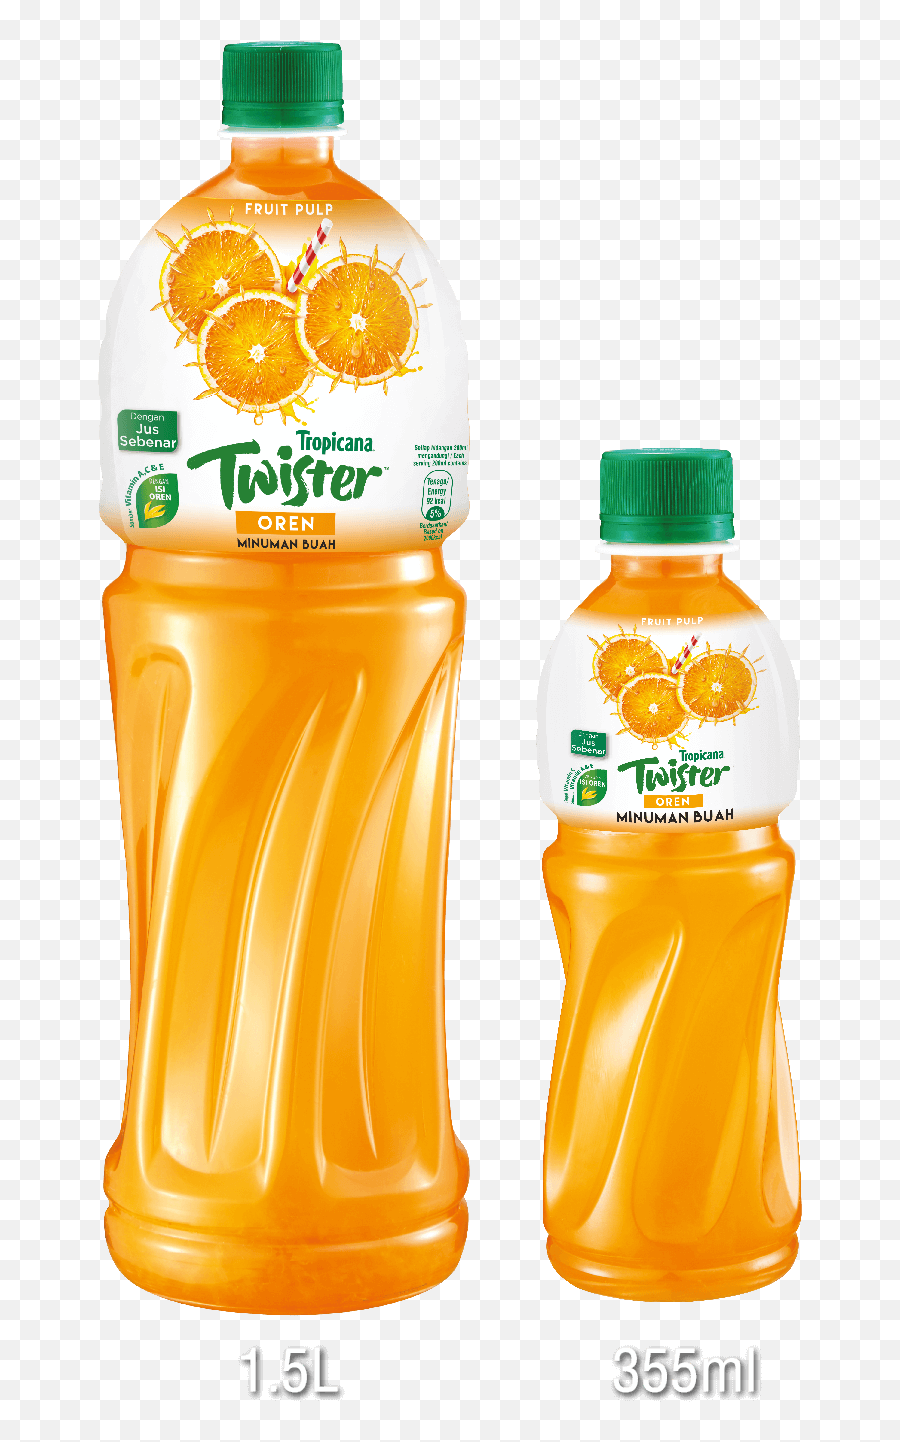 Tropicana Twister Png 5 Image - Tropicana Twister Png,Twister Png